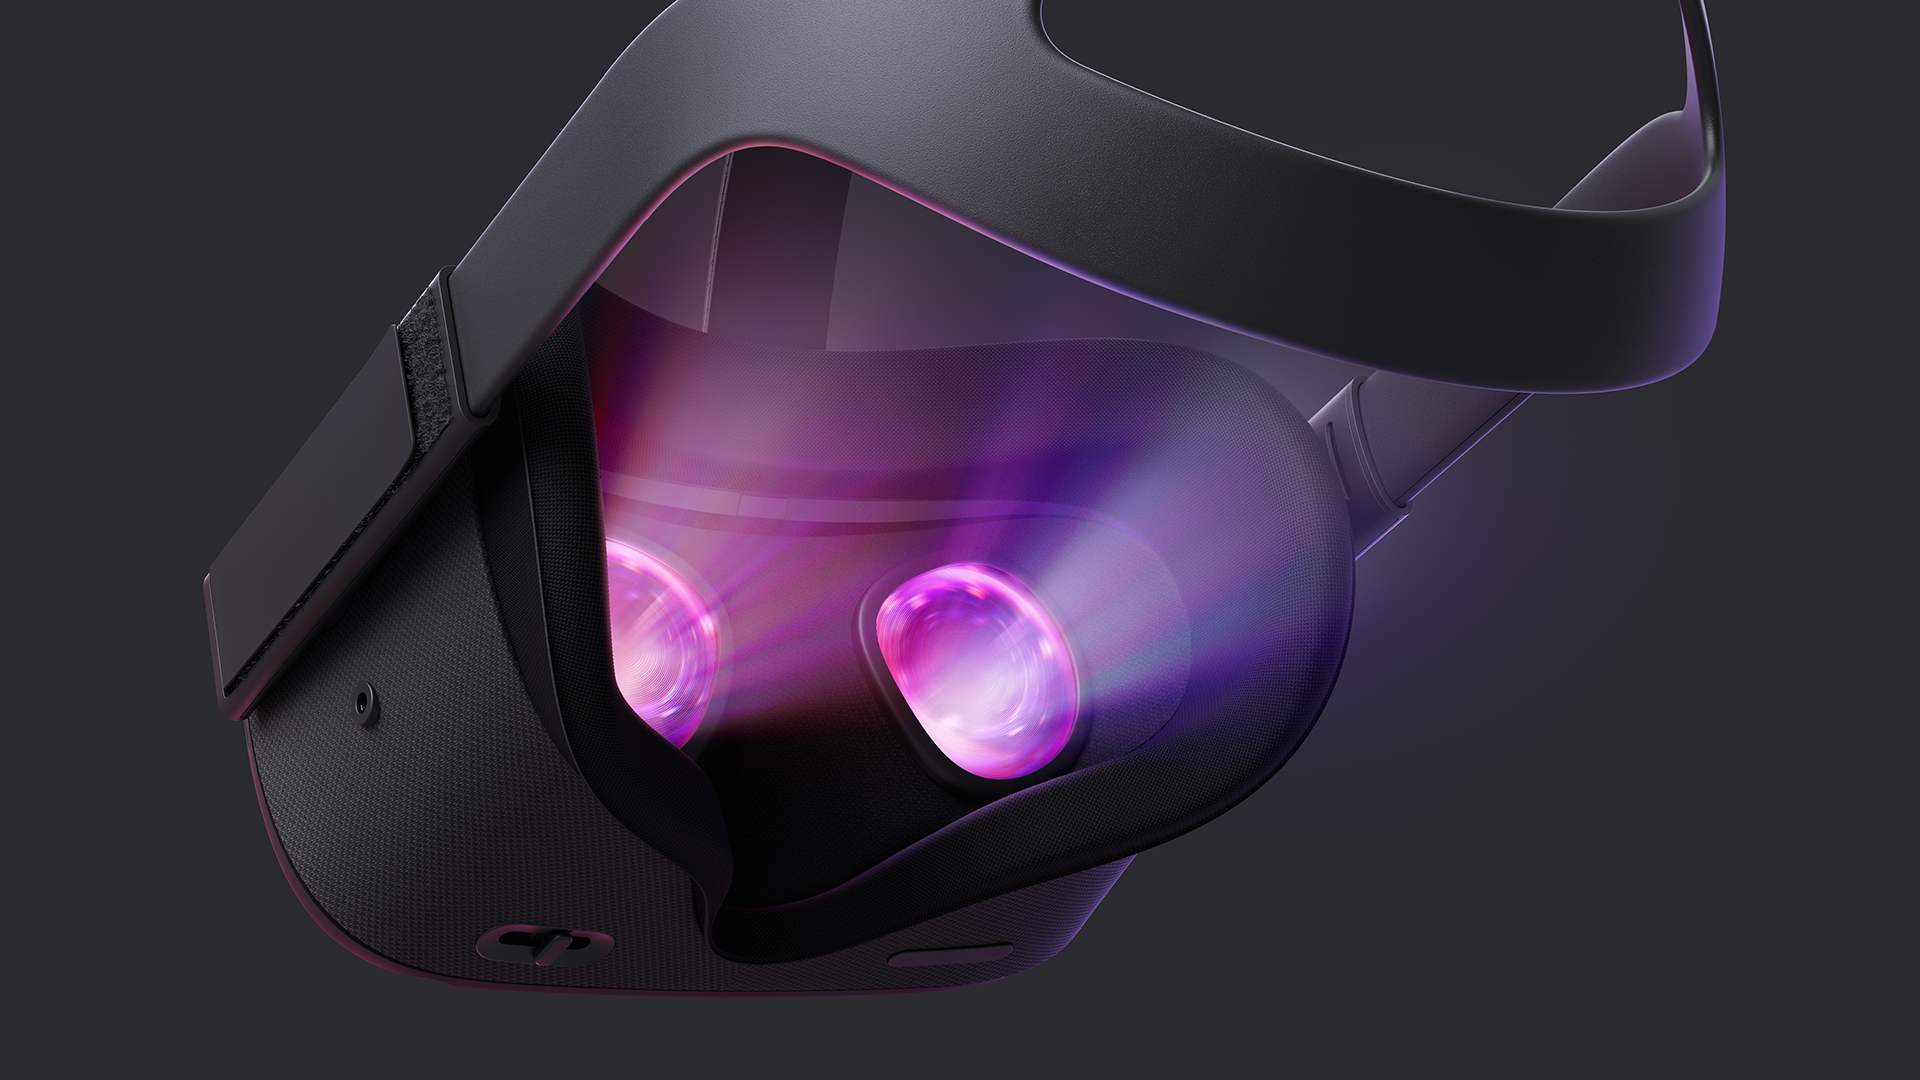 oculus-quest-vr-headset-coming-spring-2019-for-399-but-it-isn-t-for